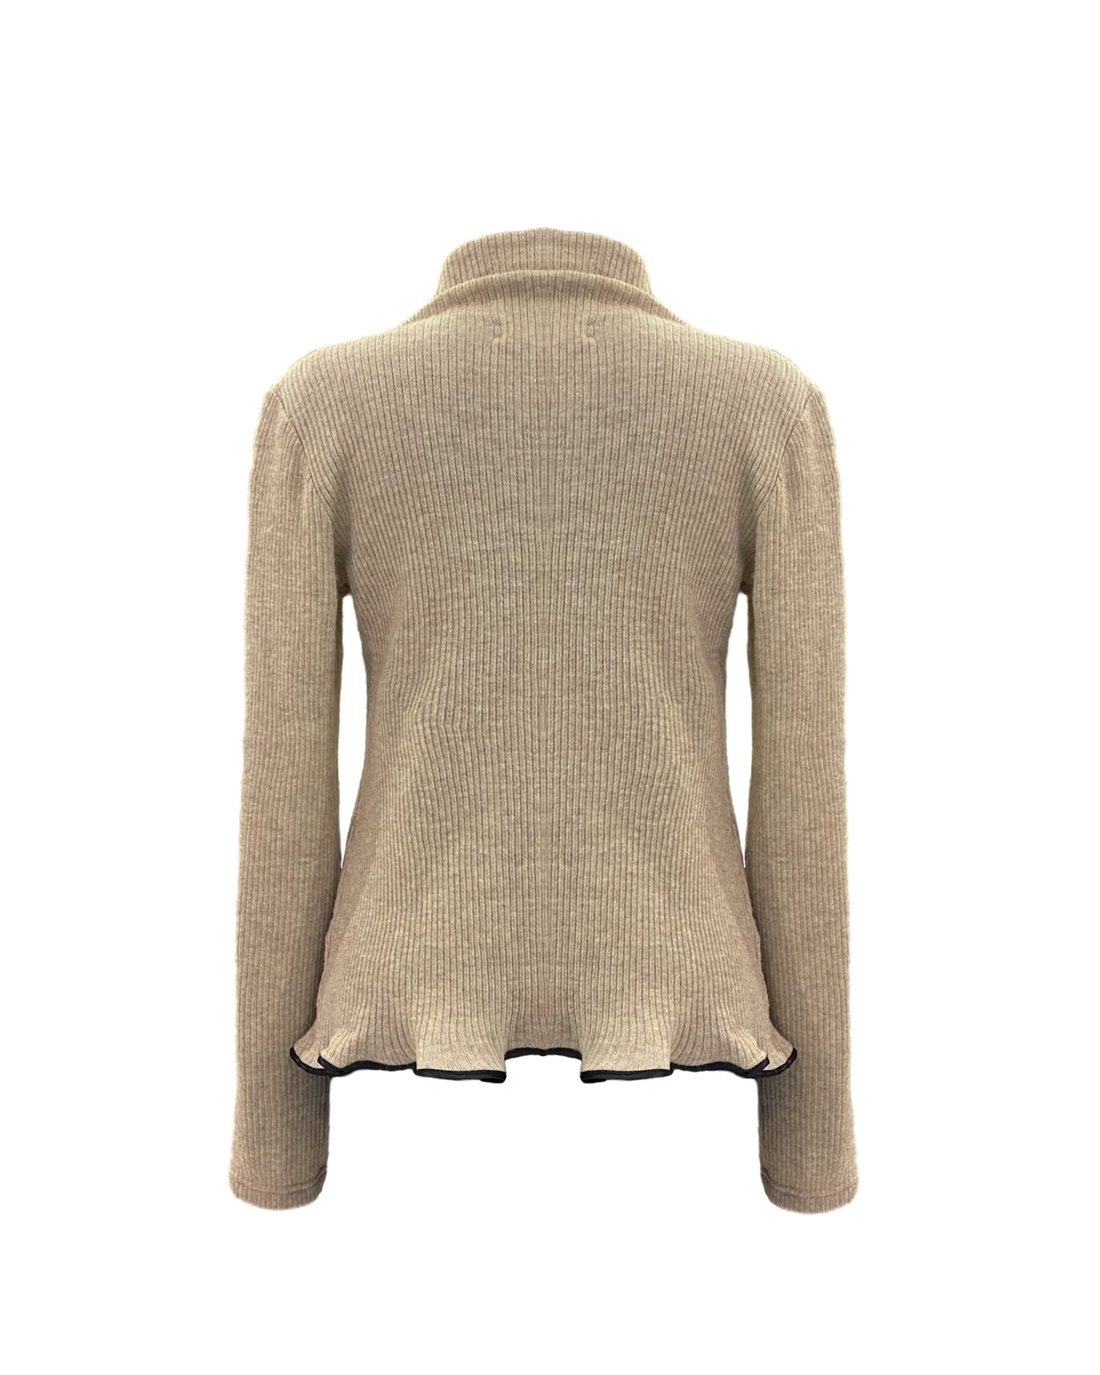 BEIGE LONG-SLEEVED TOP AW23/24